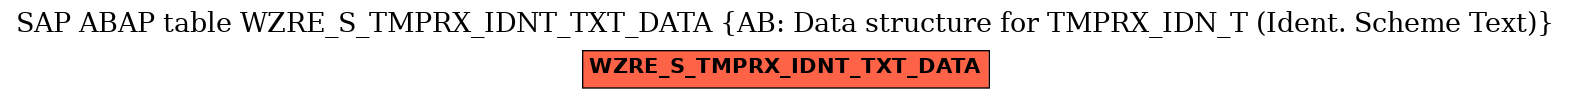 E-R Diagram for table WZRE_S_TMPRX_IDNT_TXT_DATA (AB: Data structure for TMPRX_IDN_T (Ident. Scheme Text))